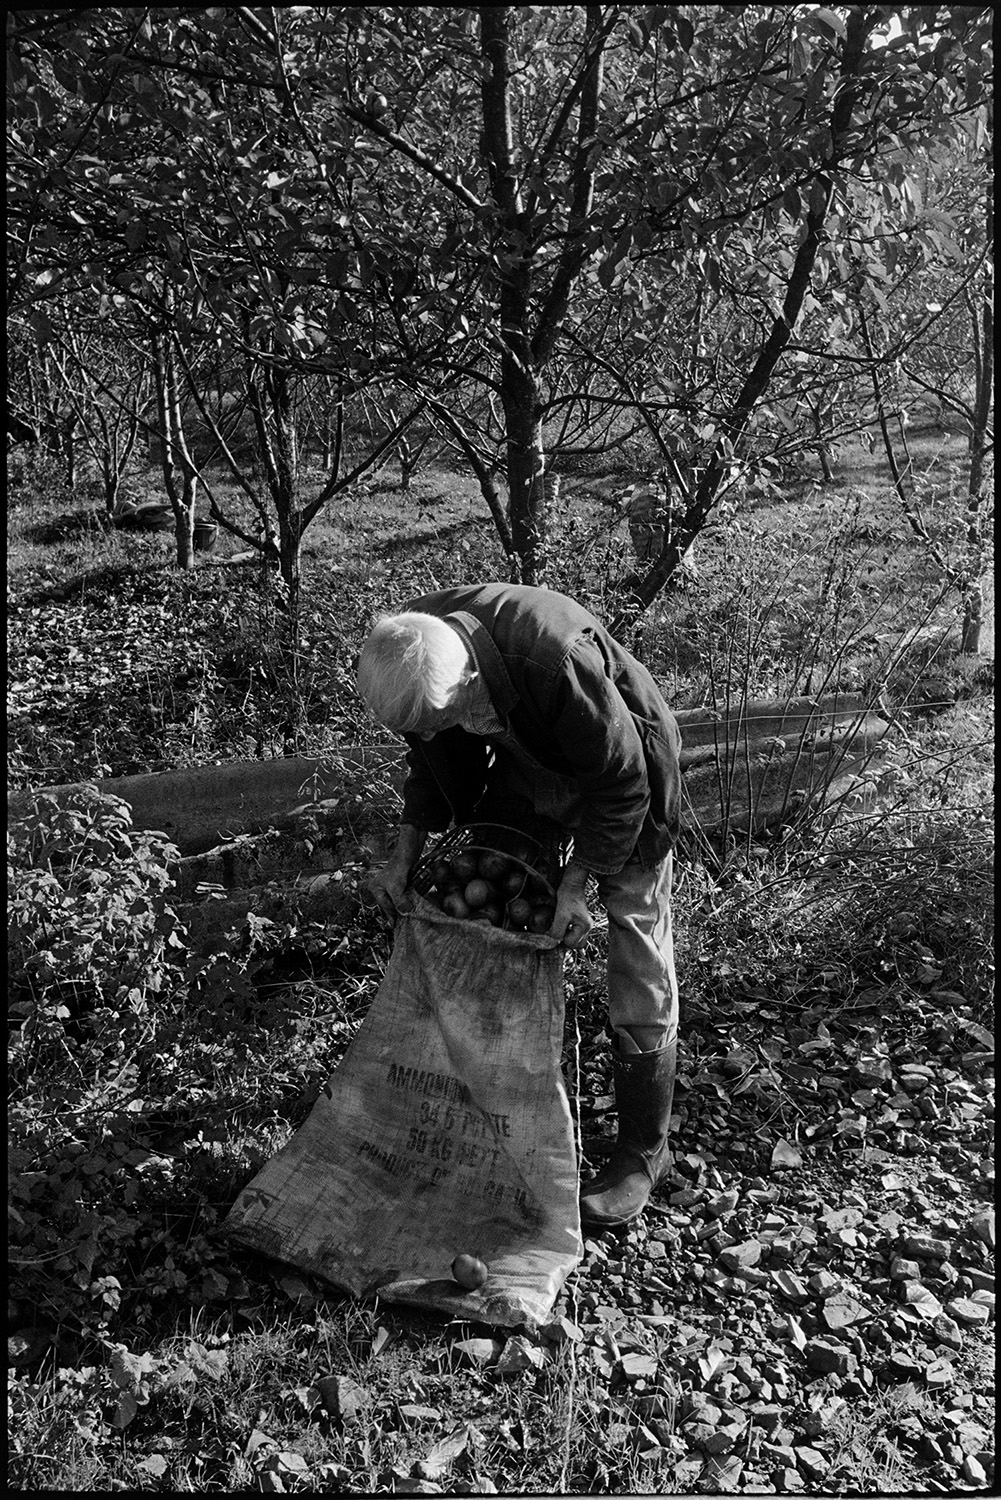 Cider making, men shaking trees and picking apples. 
[William Saunders emptying a basket of apples which he has picked, into a sack in an orchard at Hancock's cider factory at Clapworthy Mill, South Molton.]